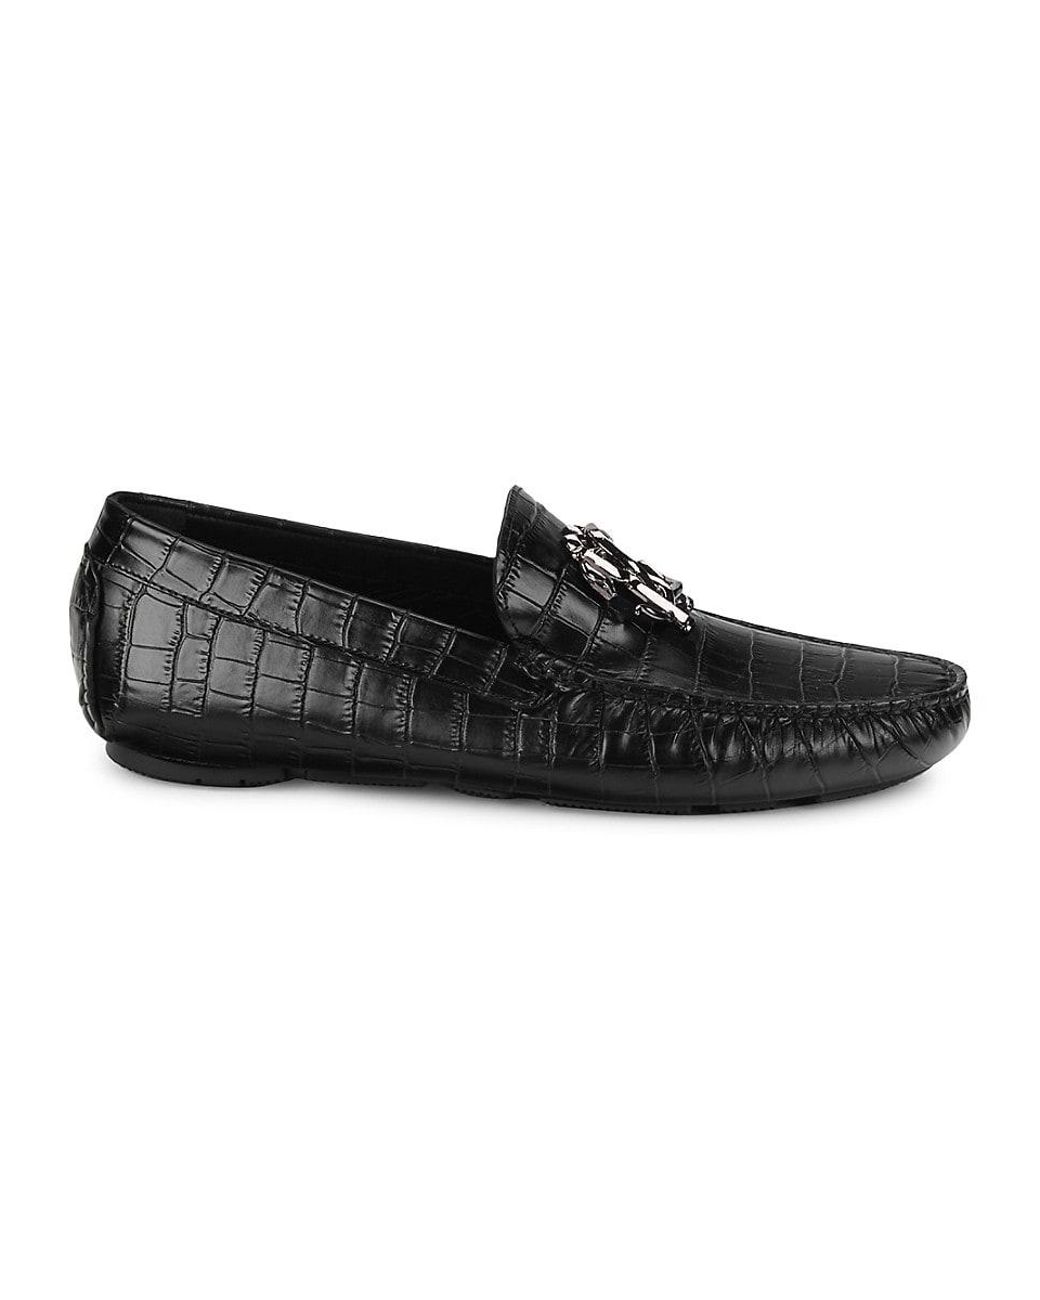 Roberto Cavalli Croc-embossed Leather Driving Loafers in Black | Lyst